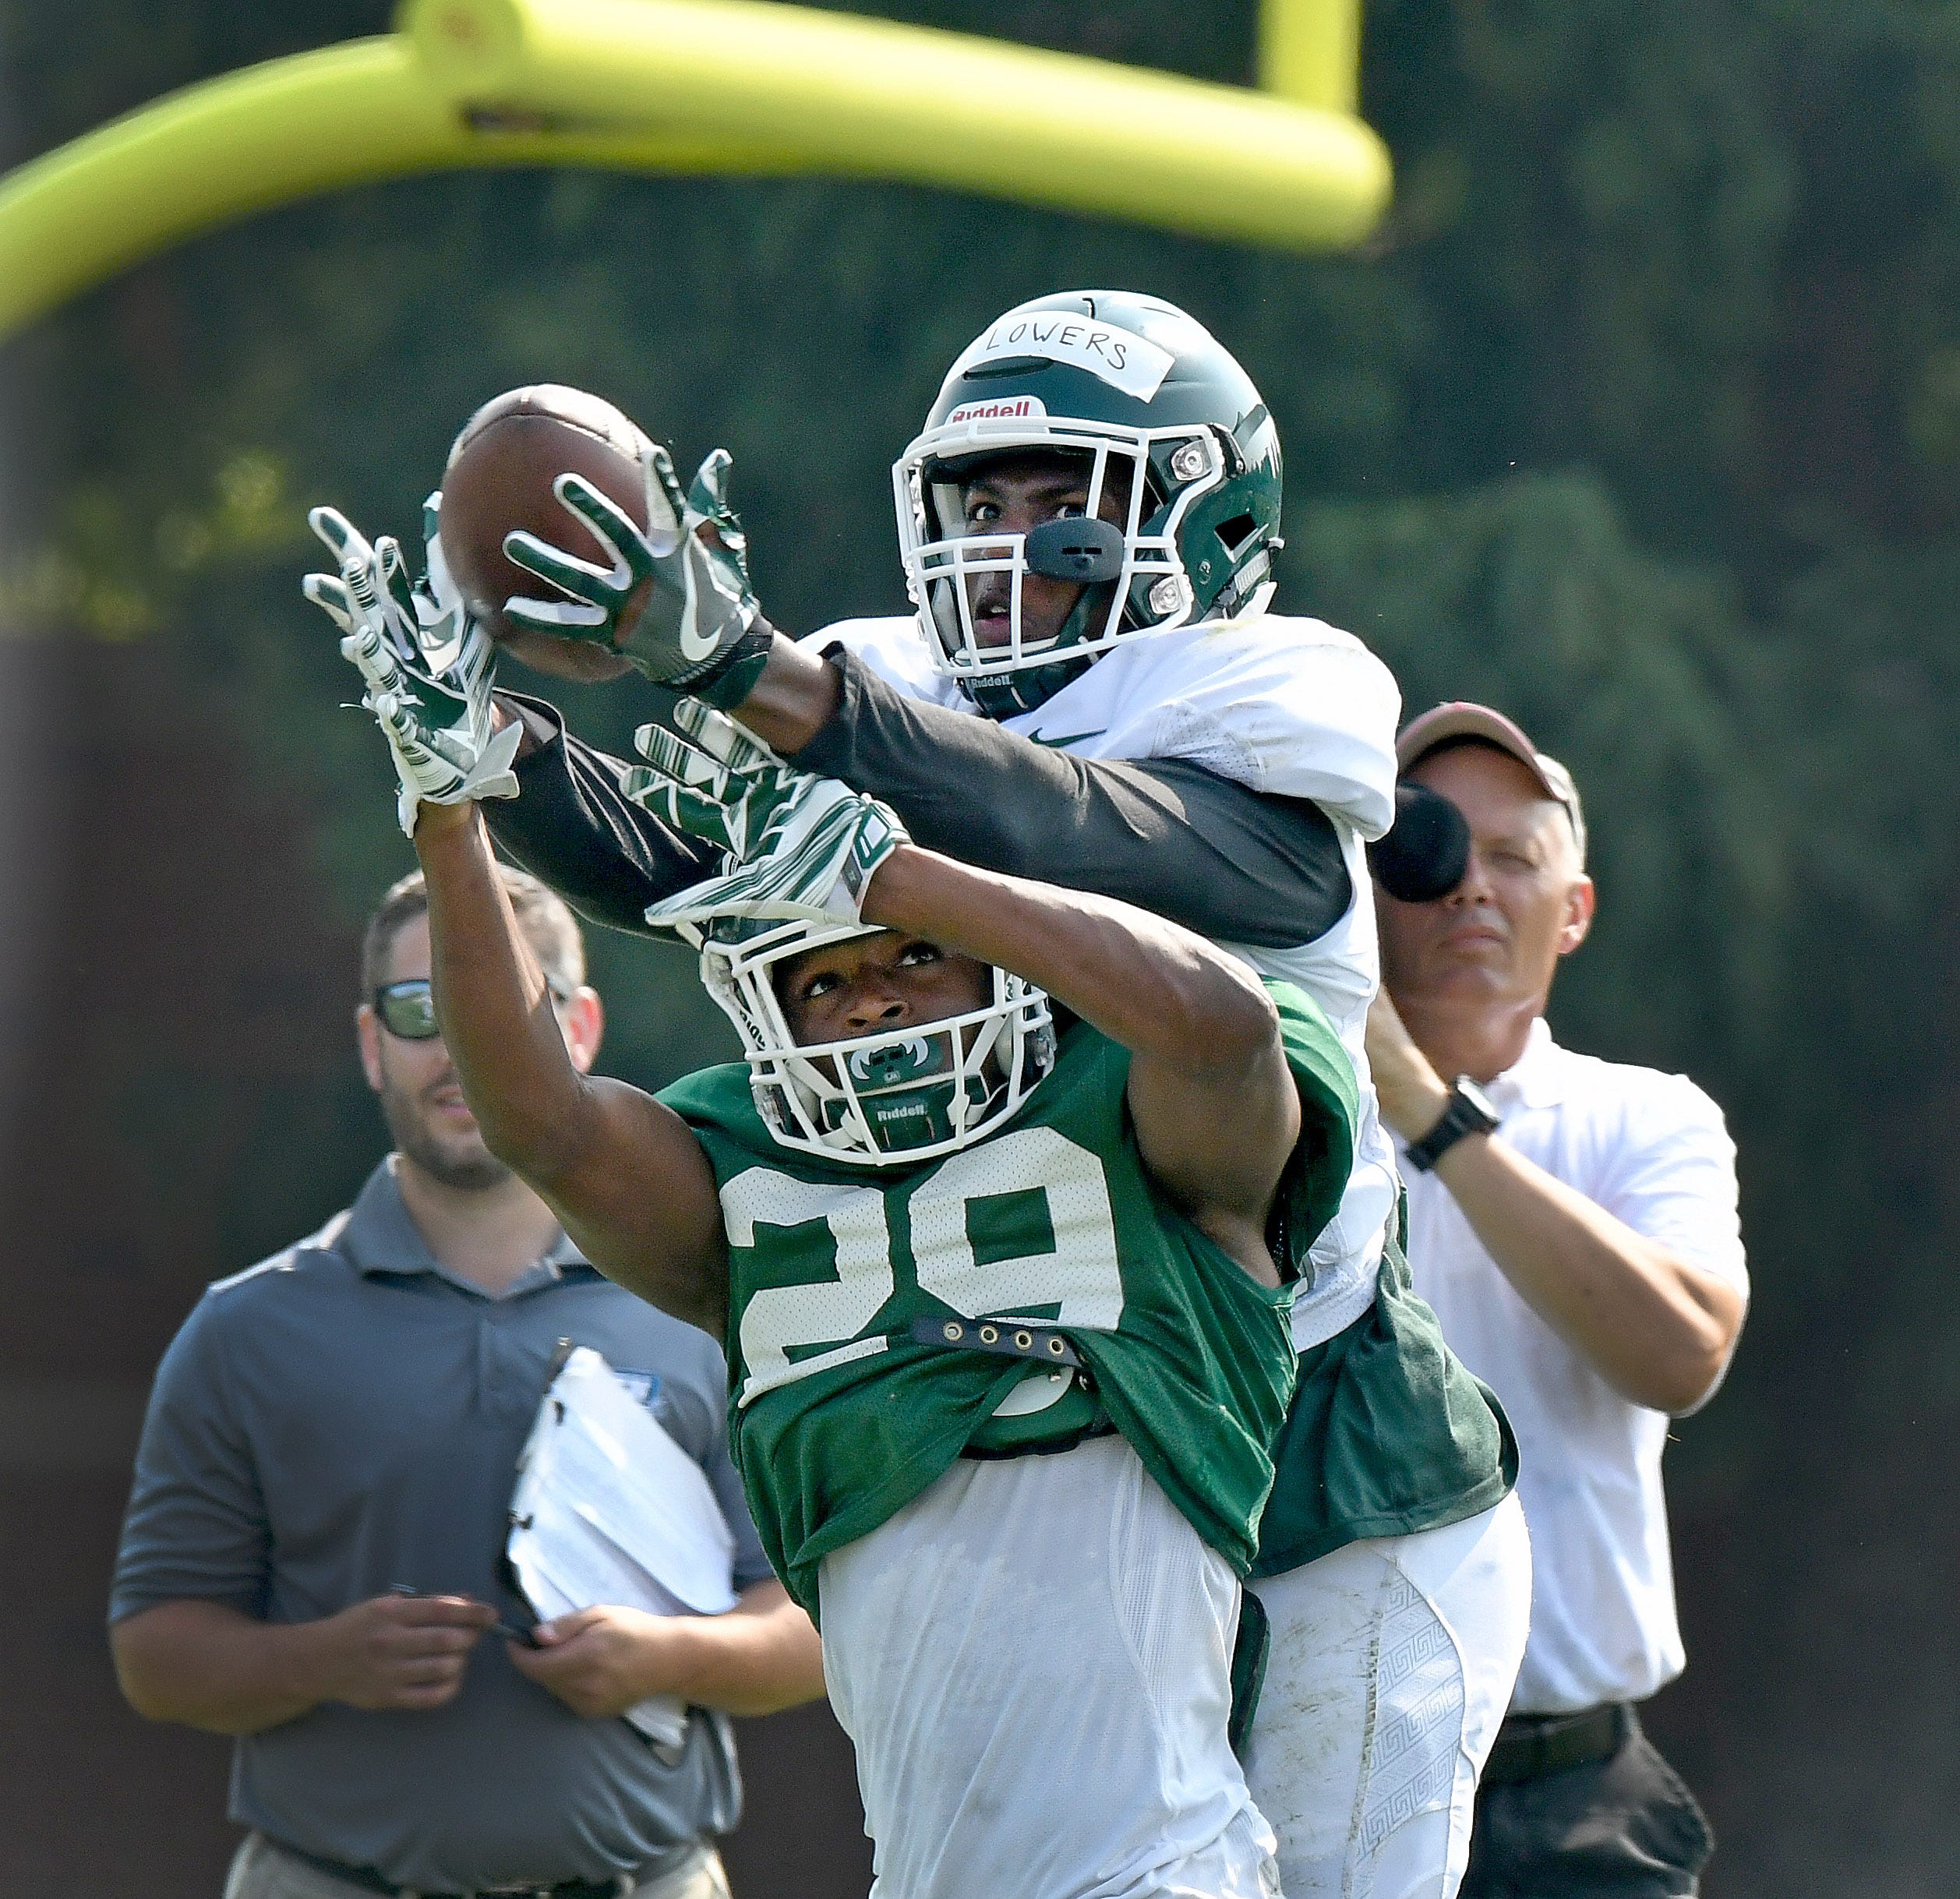 Michigan State receiver Emmanuel Flowers catches the ball over the top of teammate Shakur Brown during a morning practice session Tuesday, Aug. 14, 2018, at MSU's football practice facility in East Lansing.